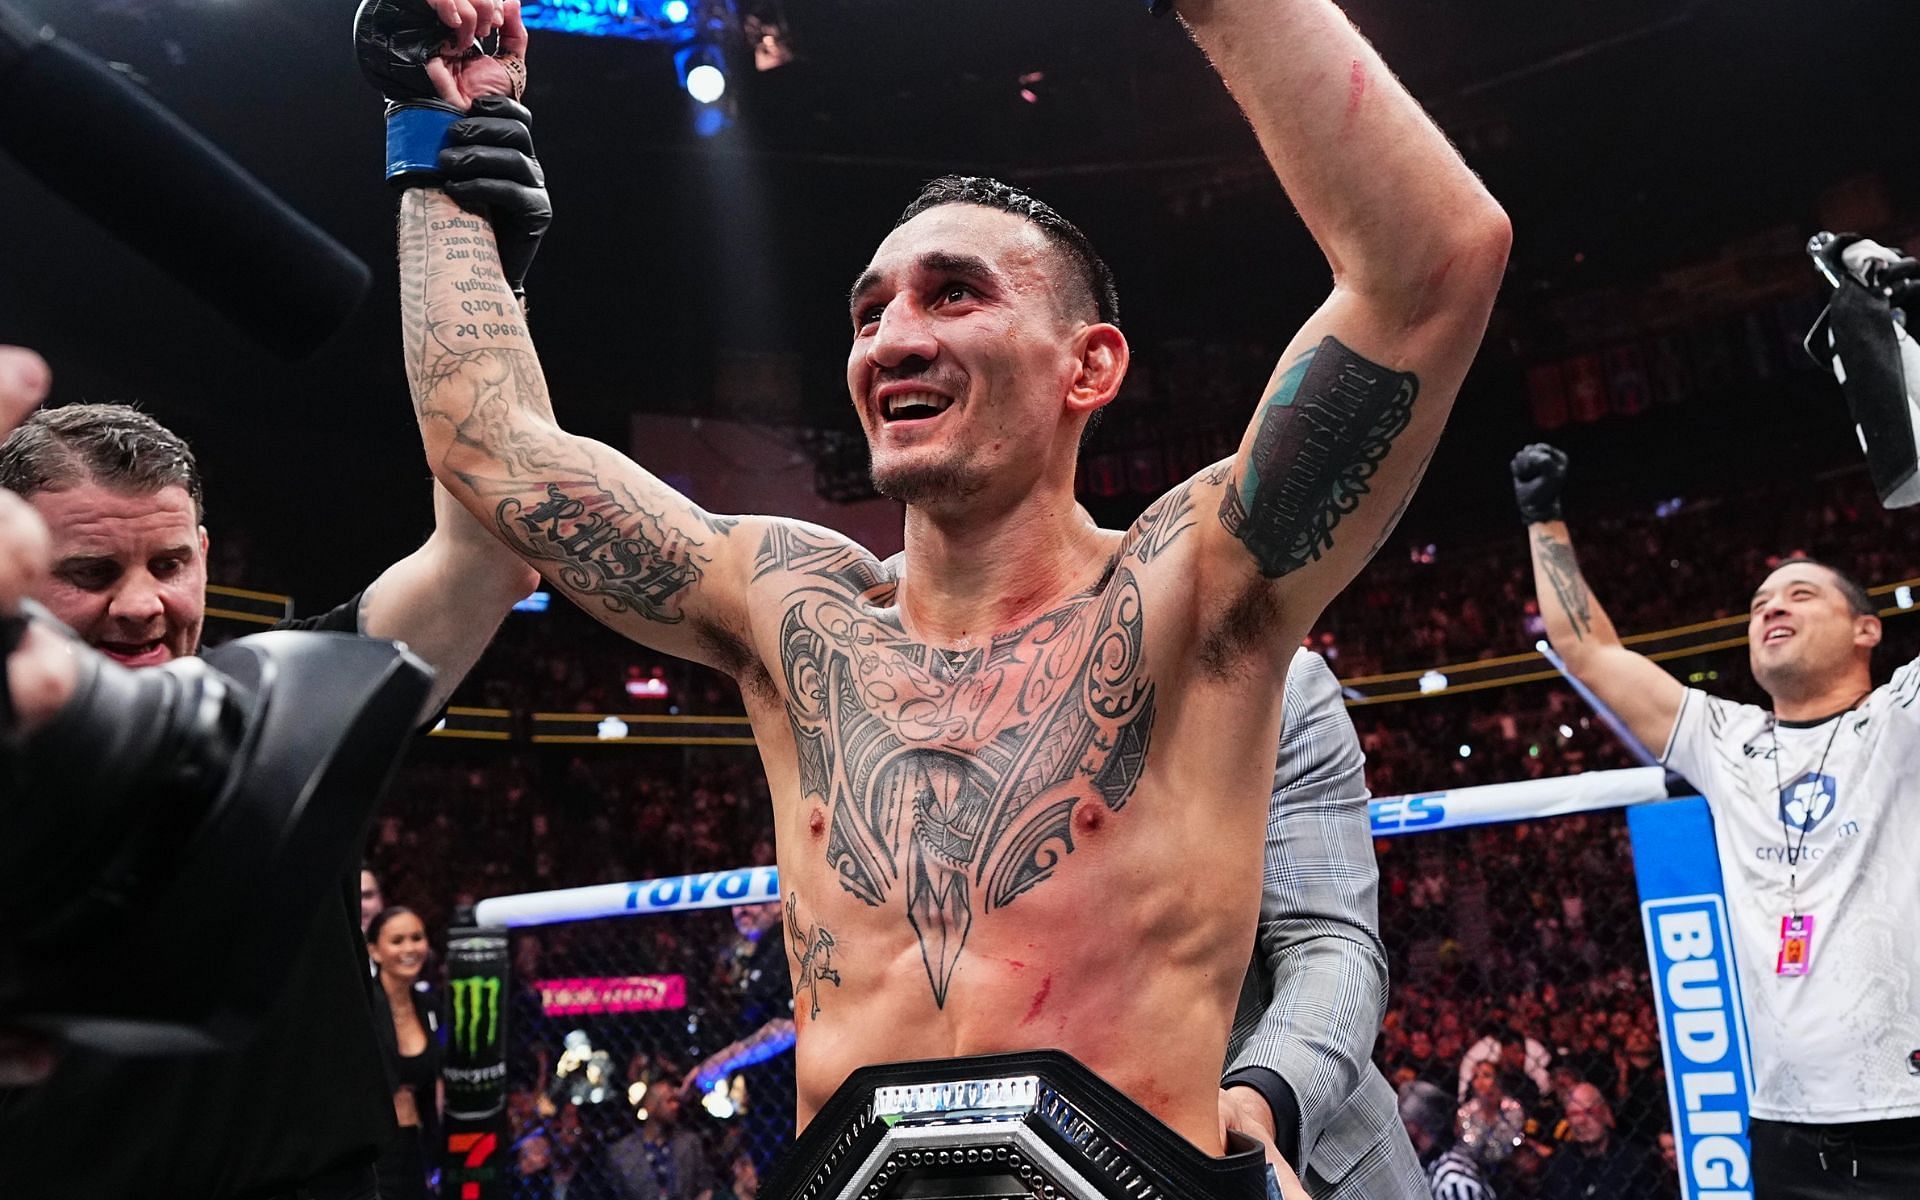 After his huge knockout last night, does a lightweight title shot lie in wait for Max Holloway?